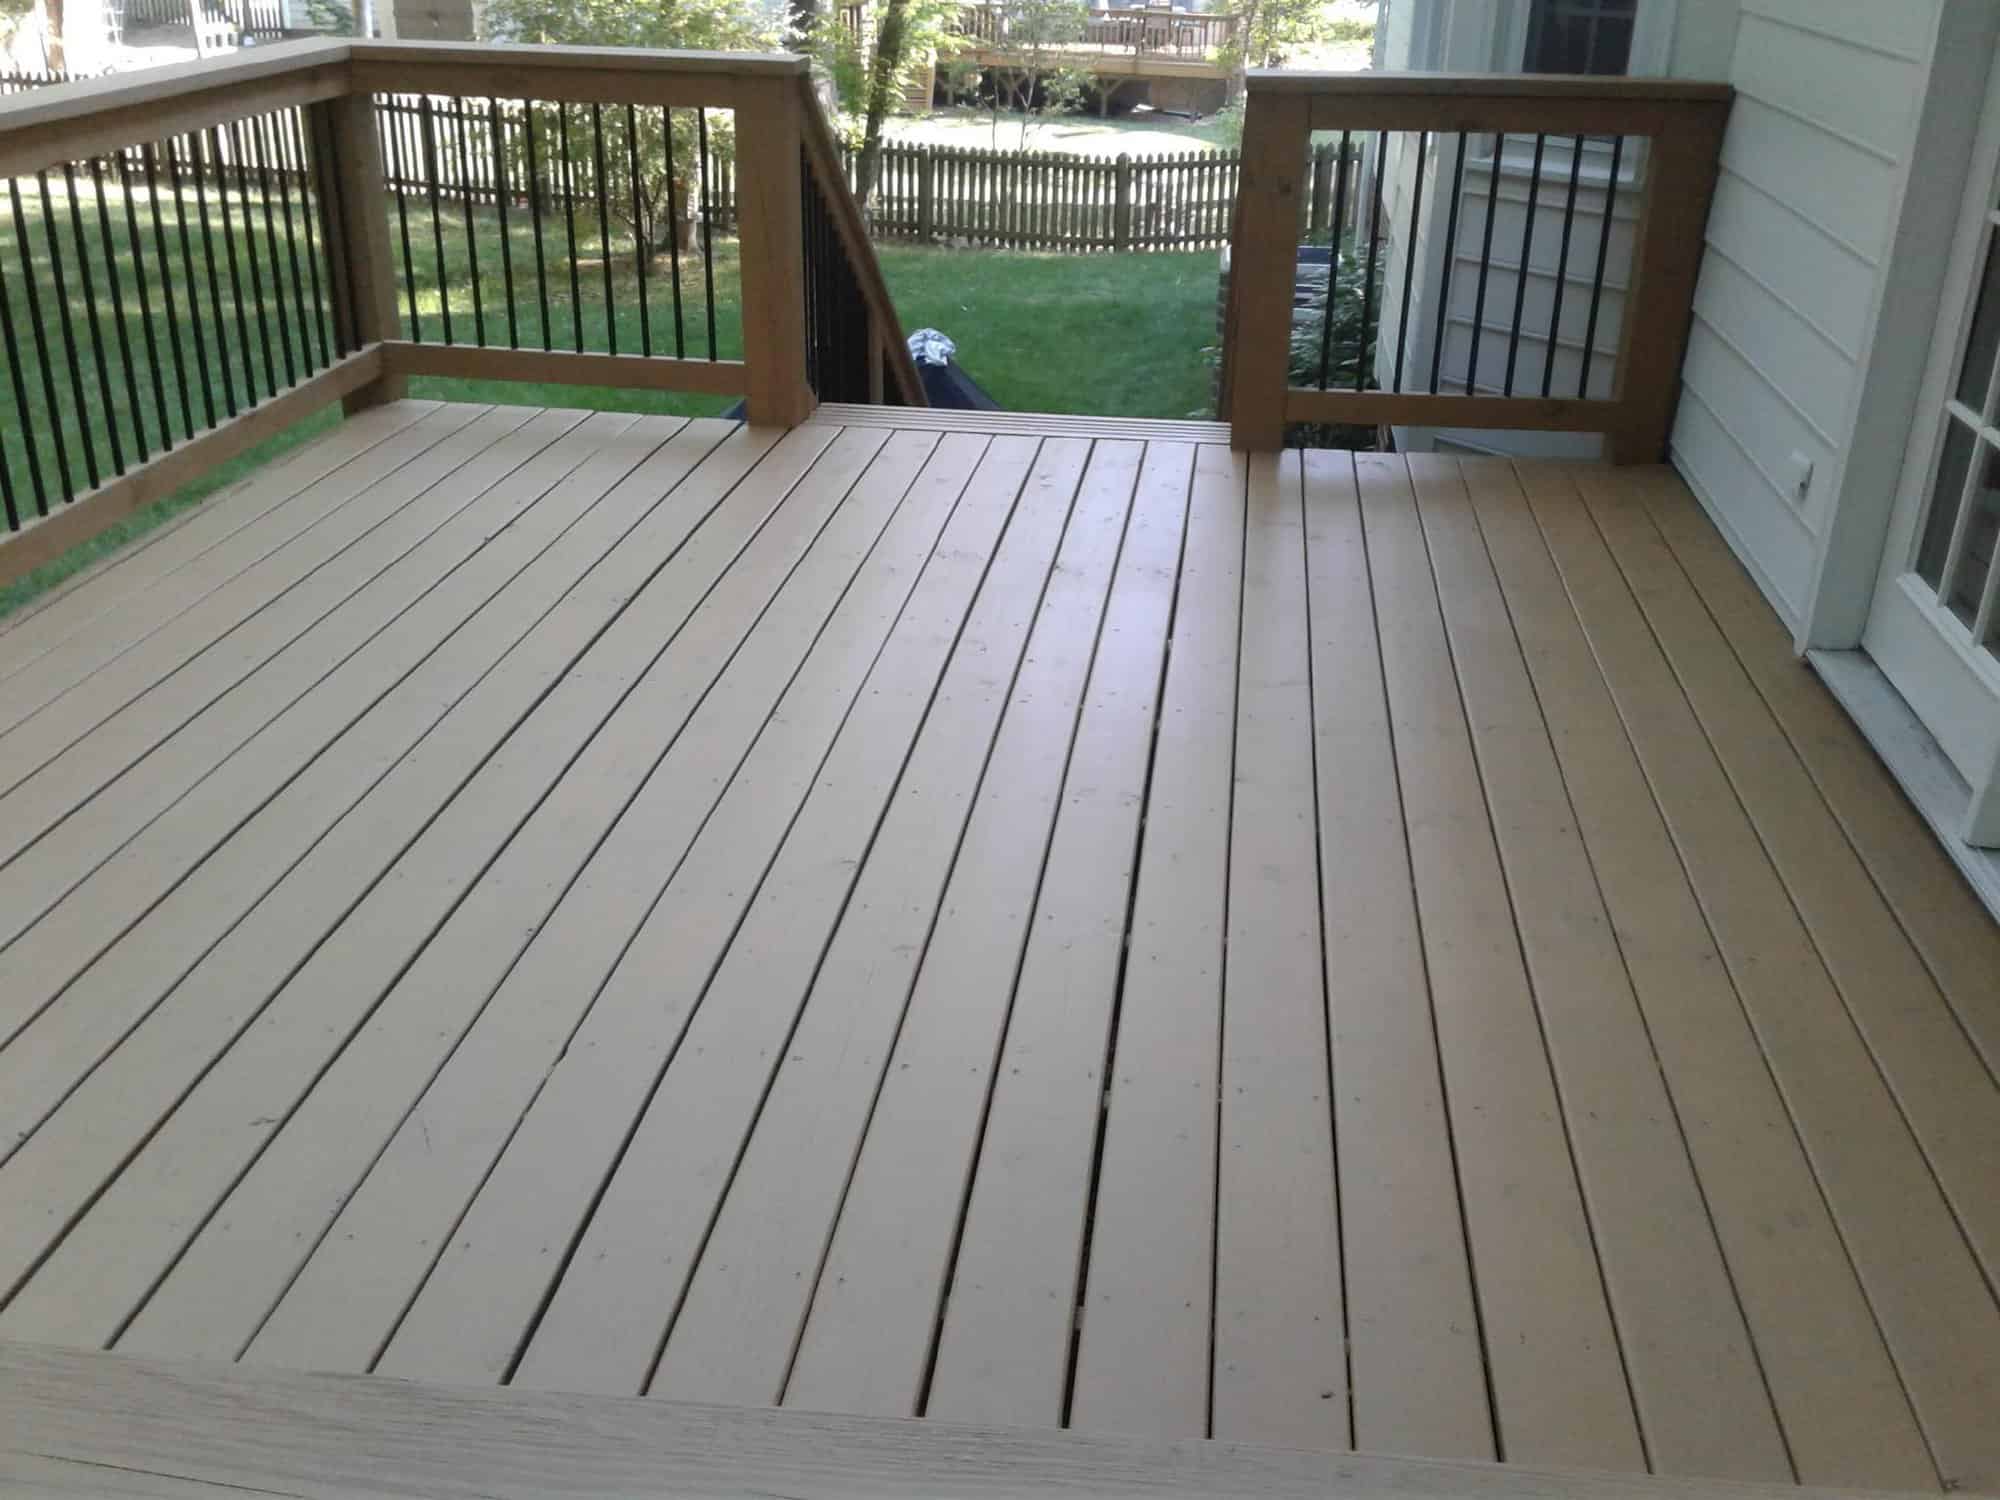 Bringing life and functionality to decks and fences in Holly Springs, NC through skilled painting.